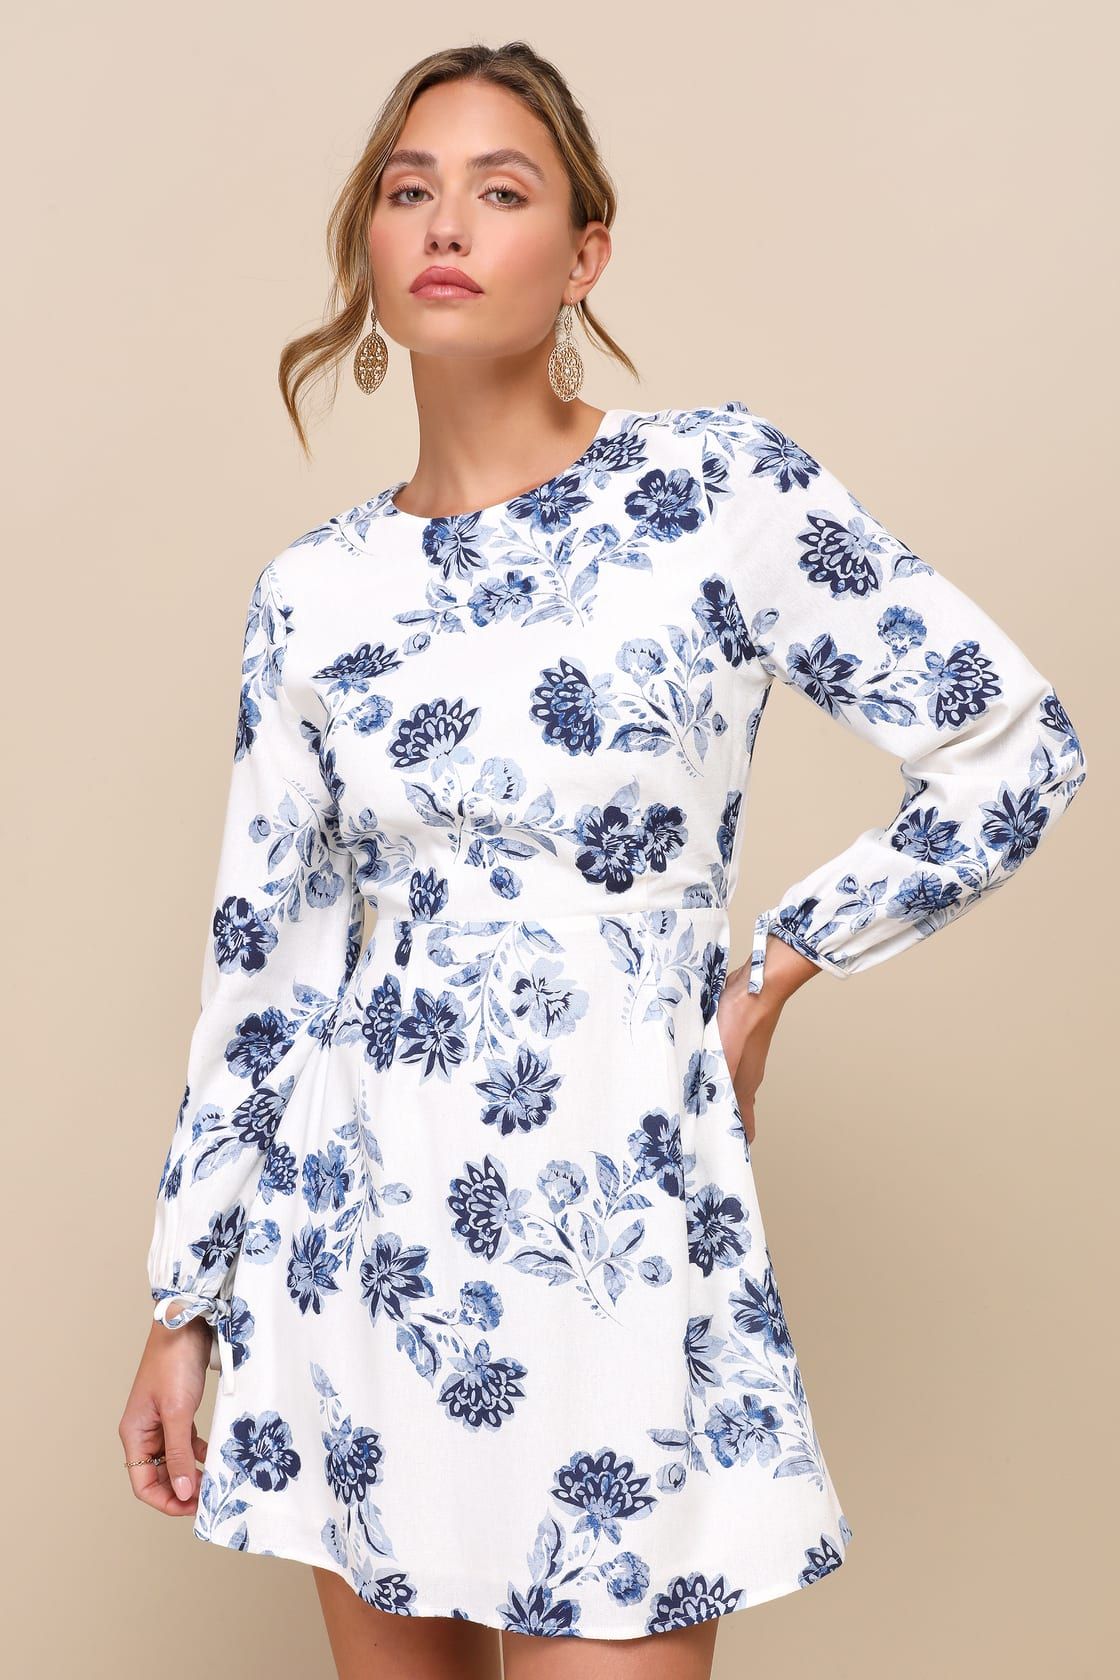 Darling Simplicity White and Blue Floral Linen Cutout Mini Dress | Lulus